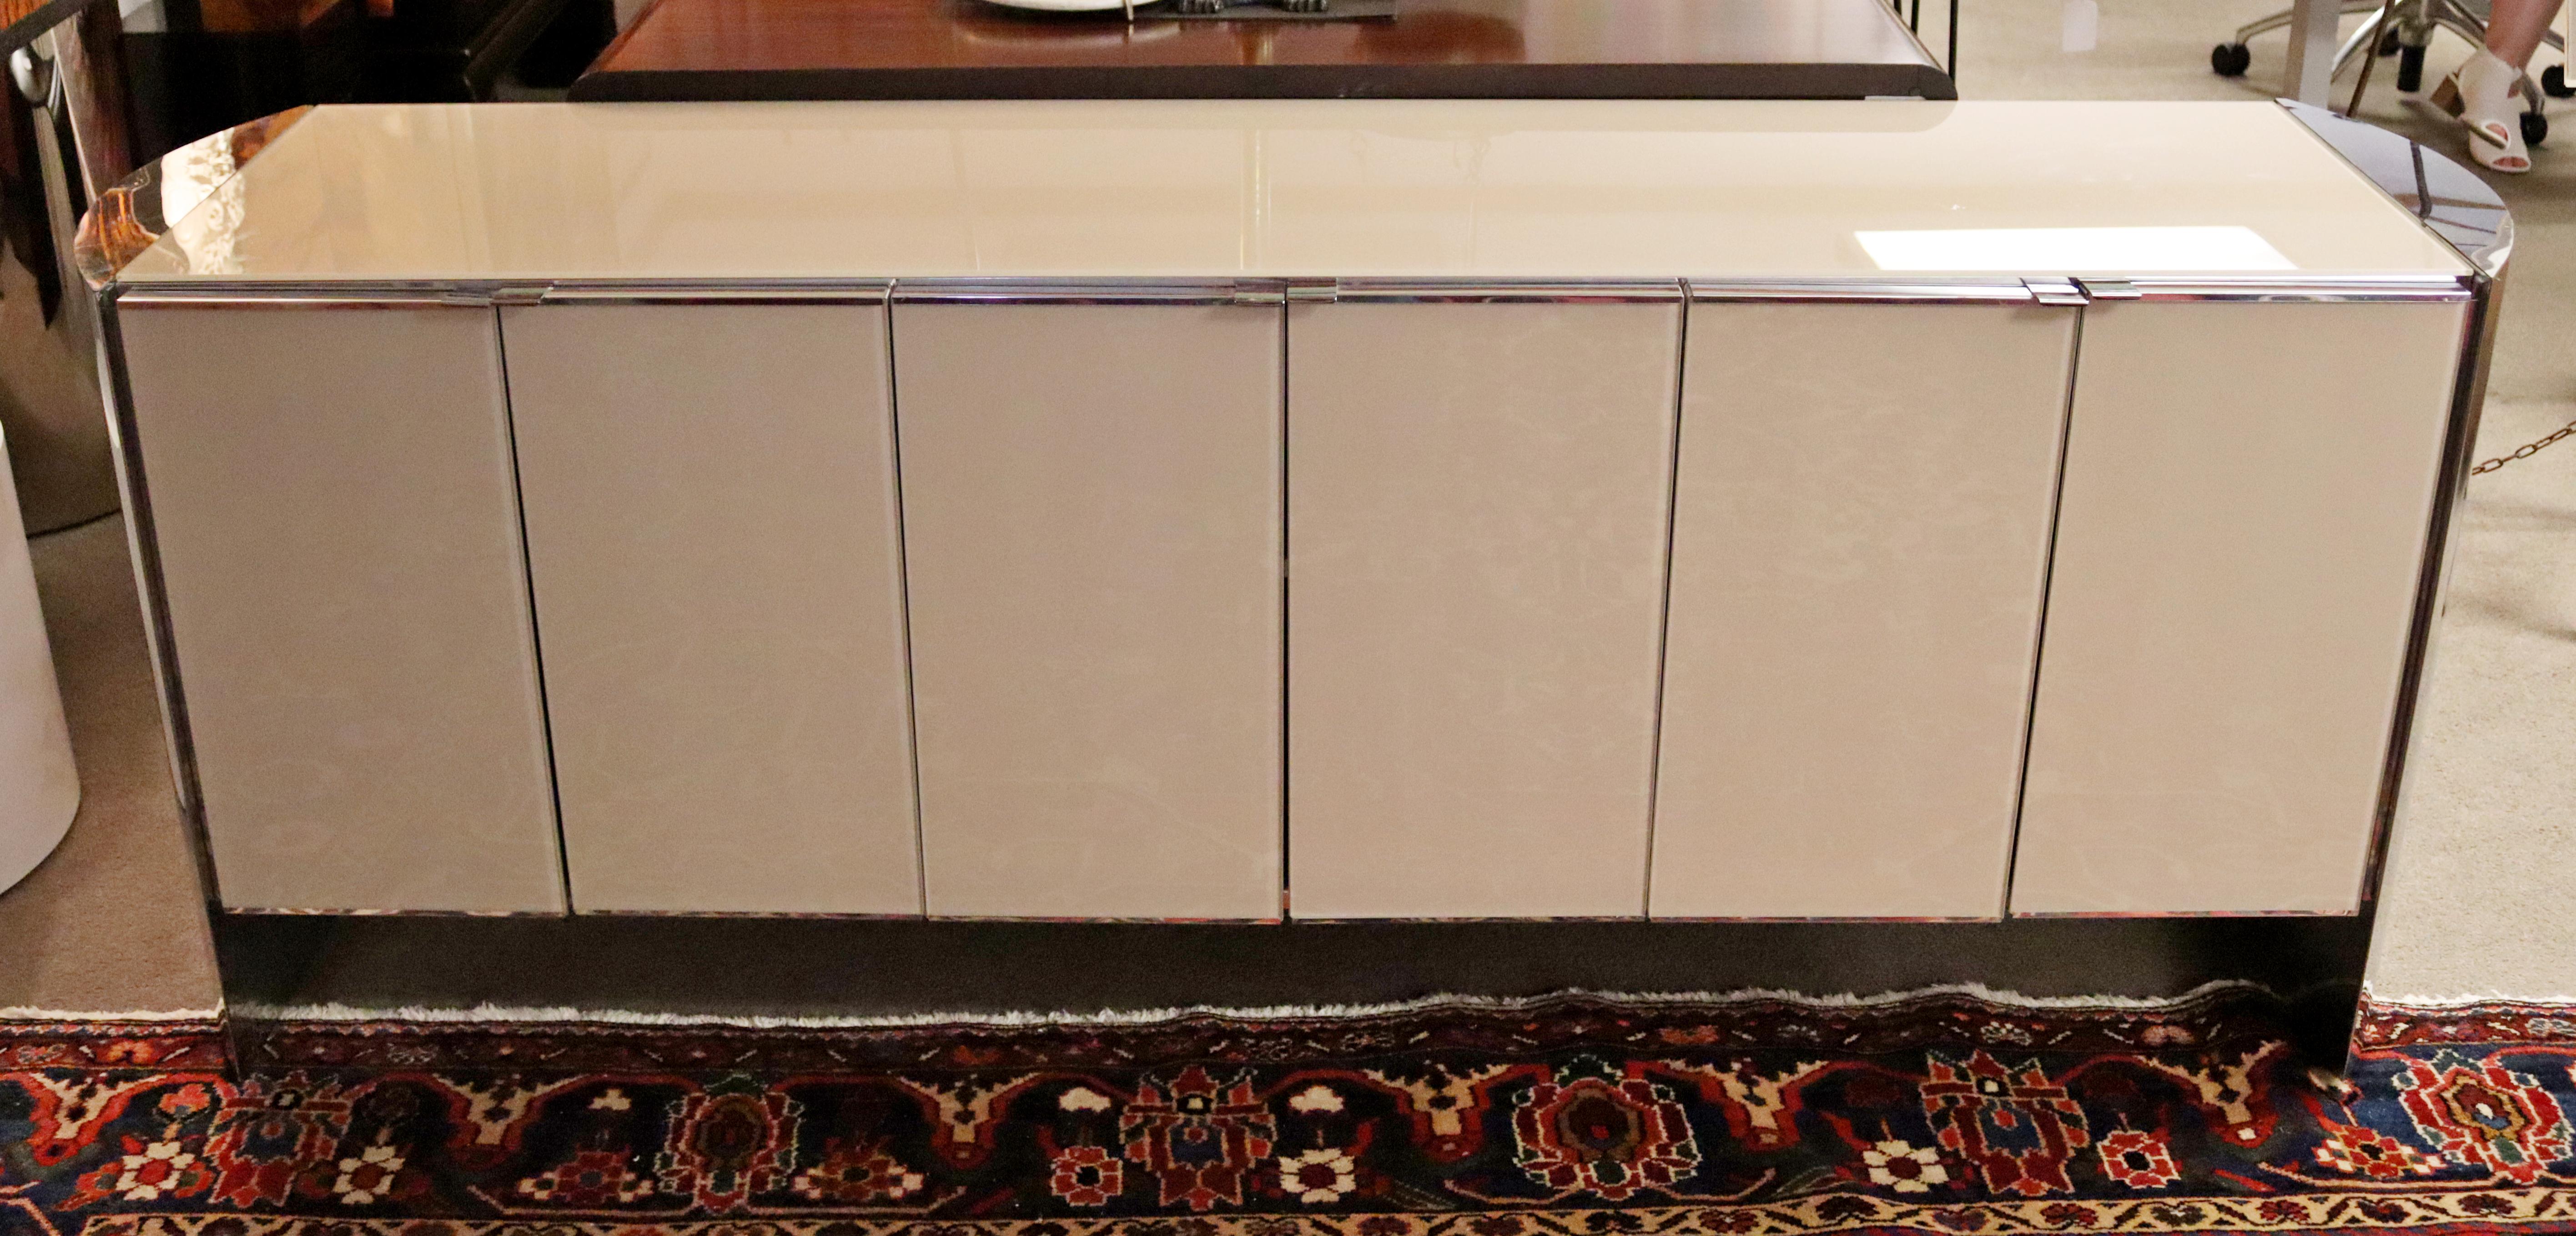 For your consideration is a gorgeous, mirrored chrome credenza, with pink glass doors, by Ello, circa the 1980s. In excellent vintage condition. The dimensions are 80